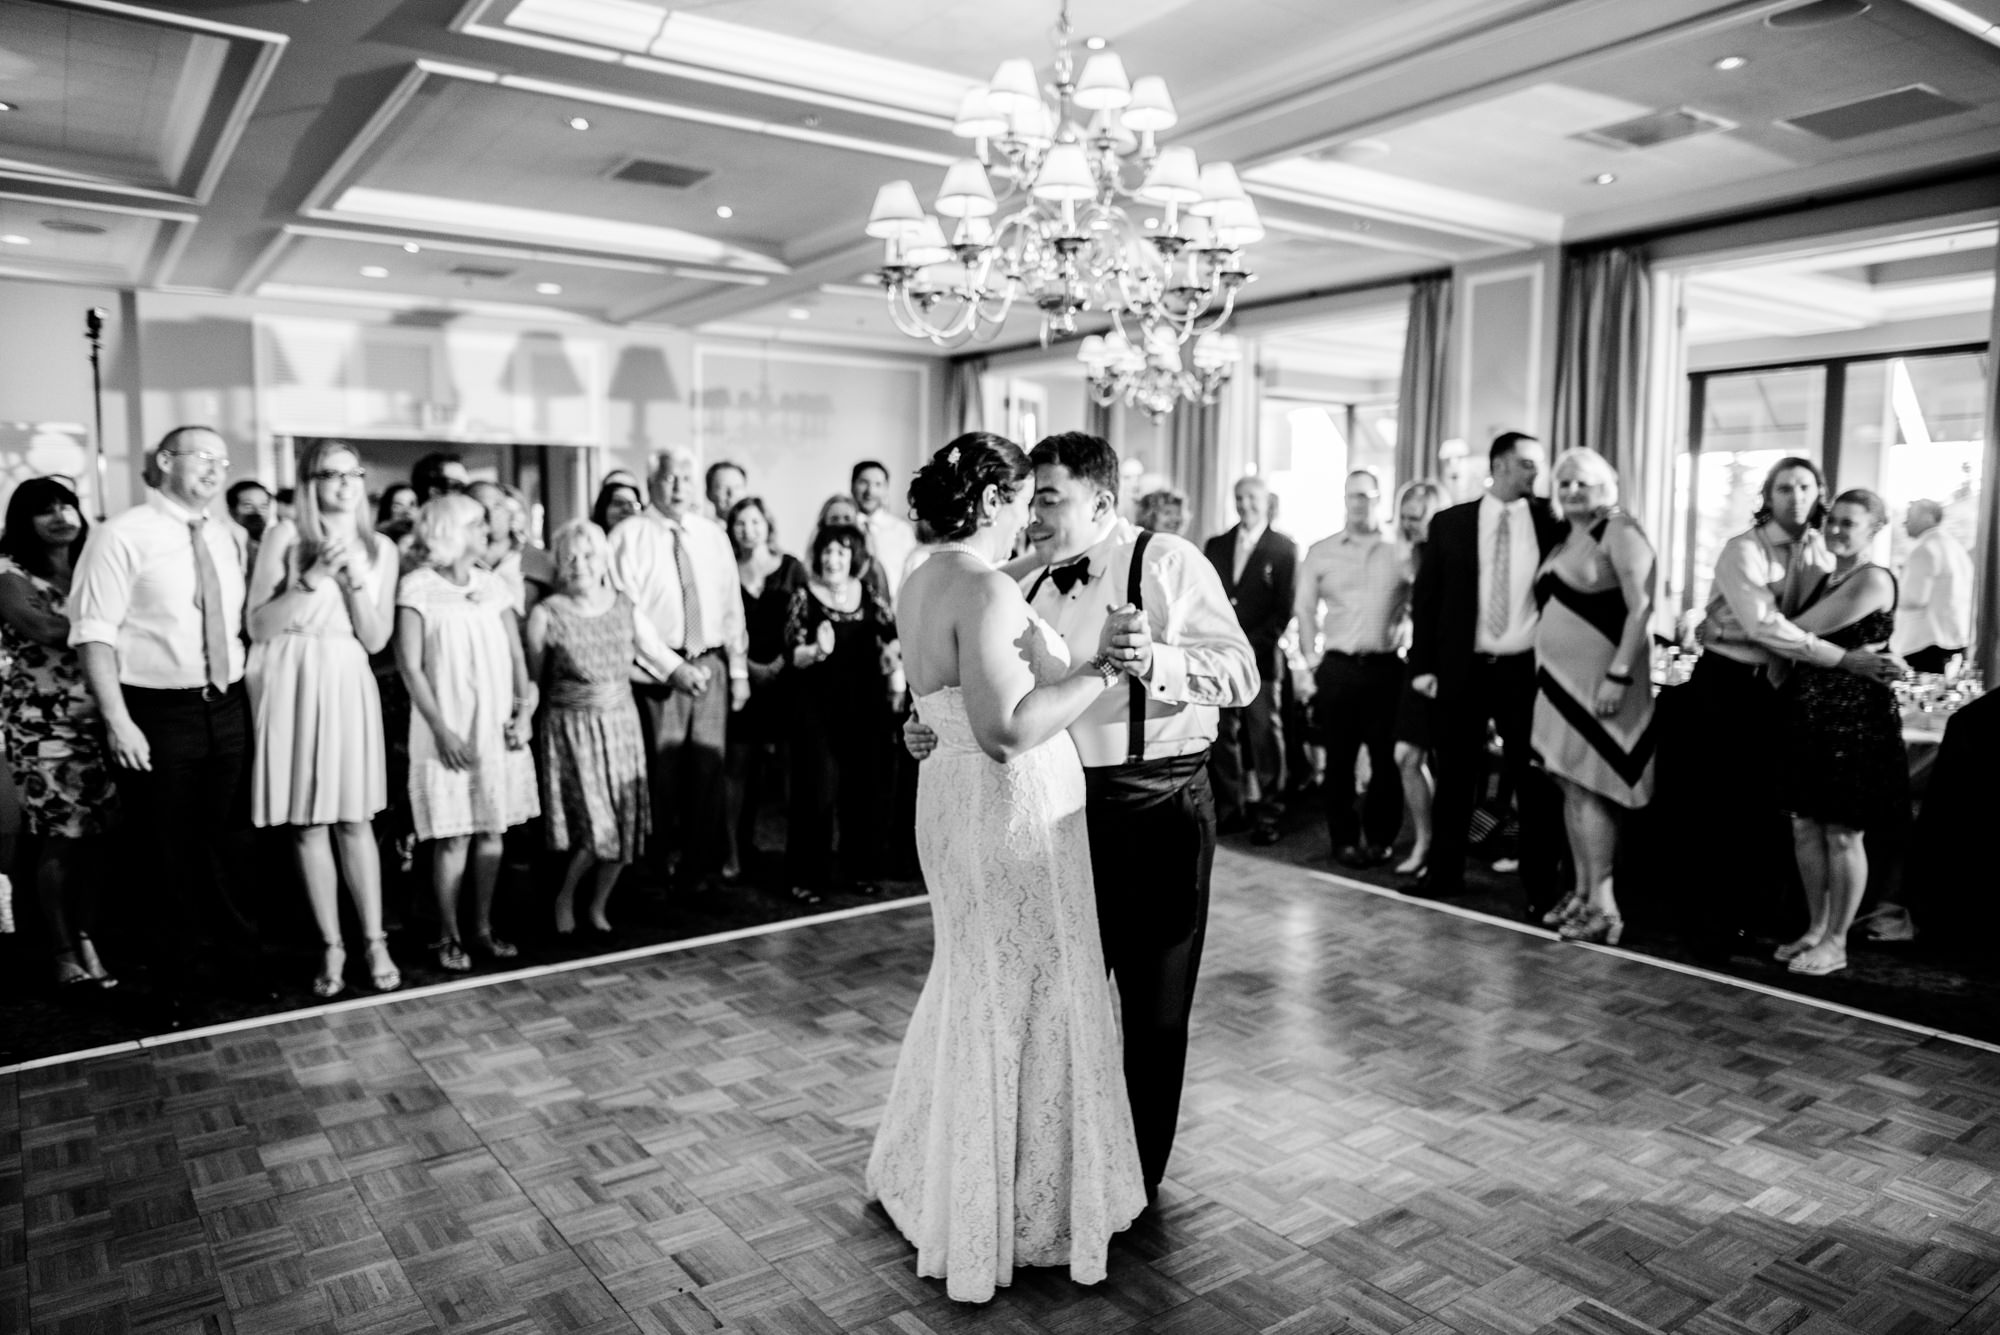 Joelle and Ryan share their first dance at their wedding reception at the Seattle Tennis Club, a wedding venue in Seattle, Washington. Photo by Seattle Wedding Photographers Jennifer Tai Photo Artistry.